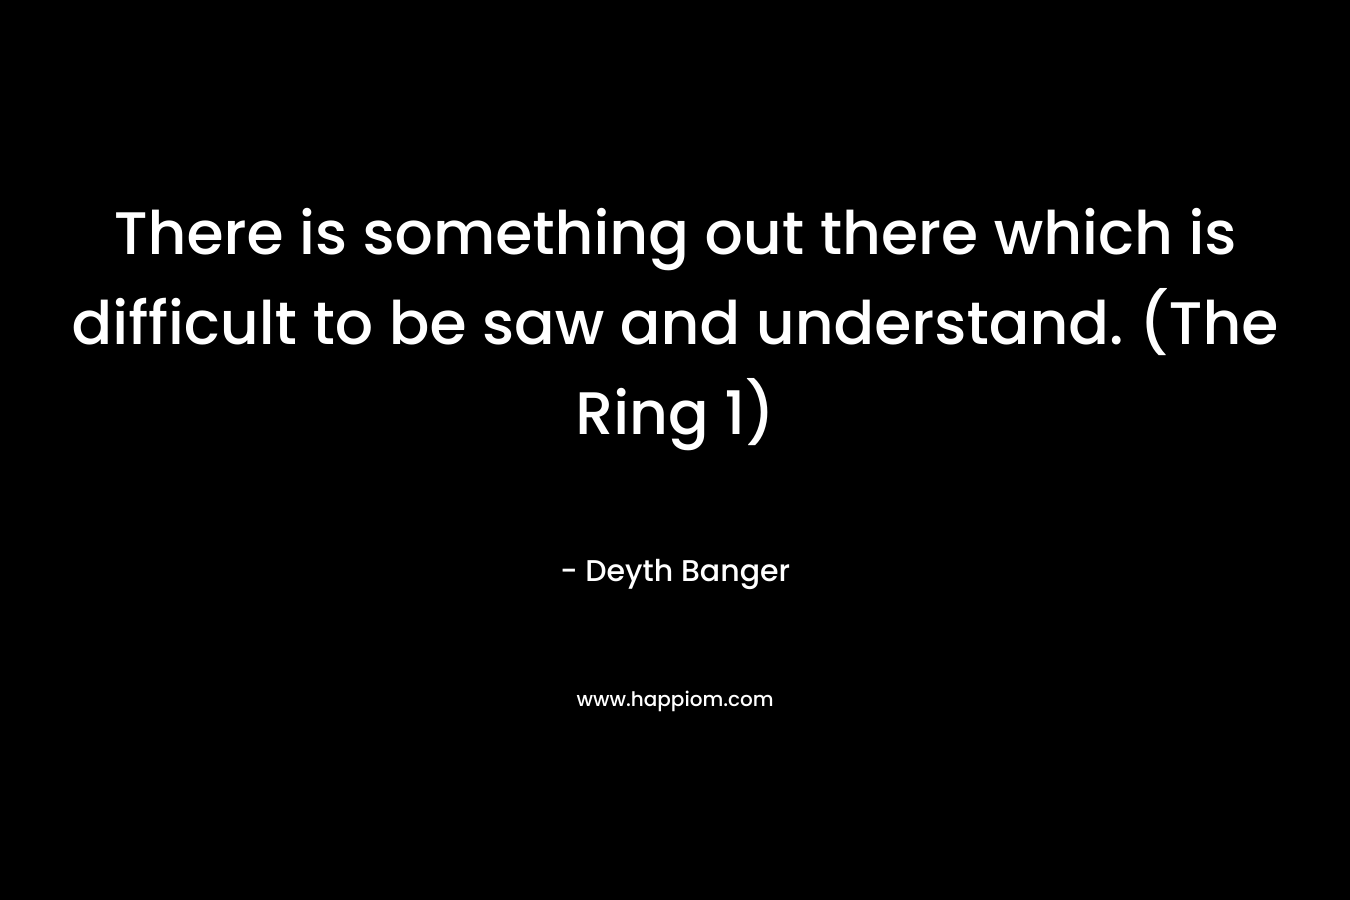 There is something out there which is difficult to be saw and understand. (The Ring 1)